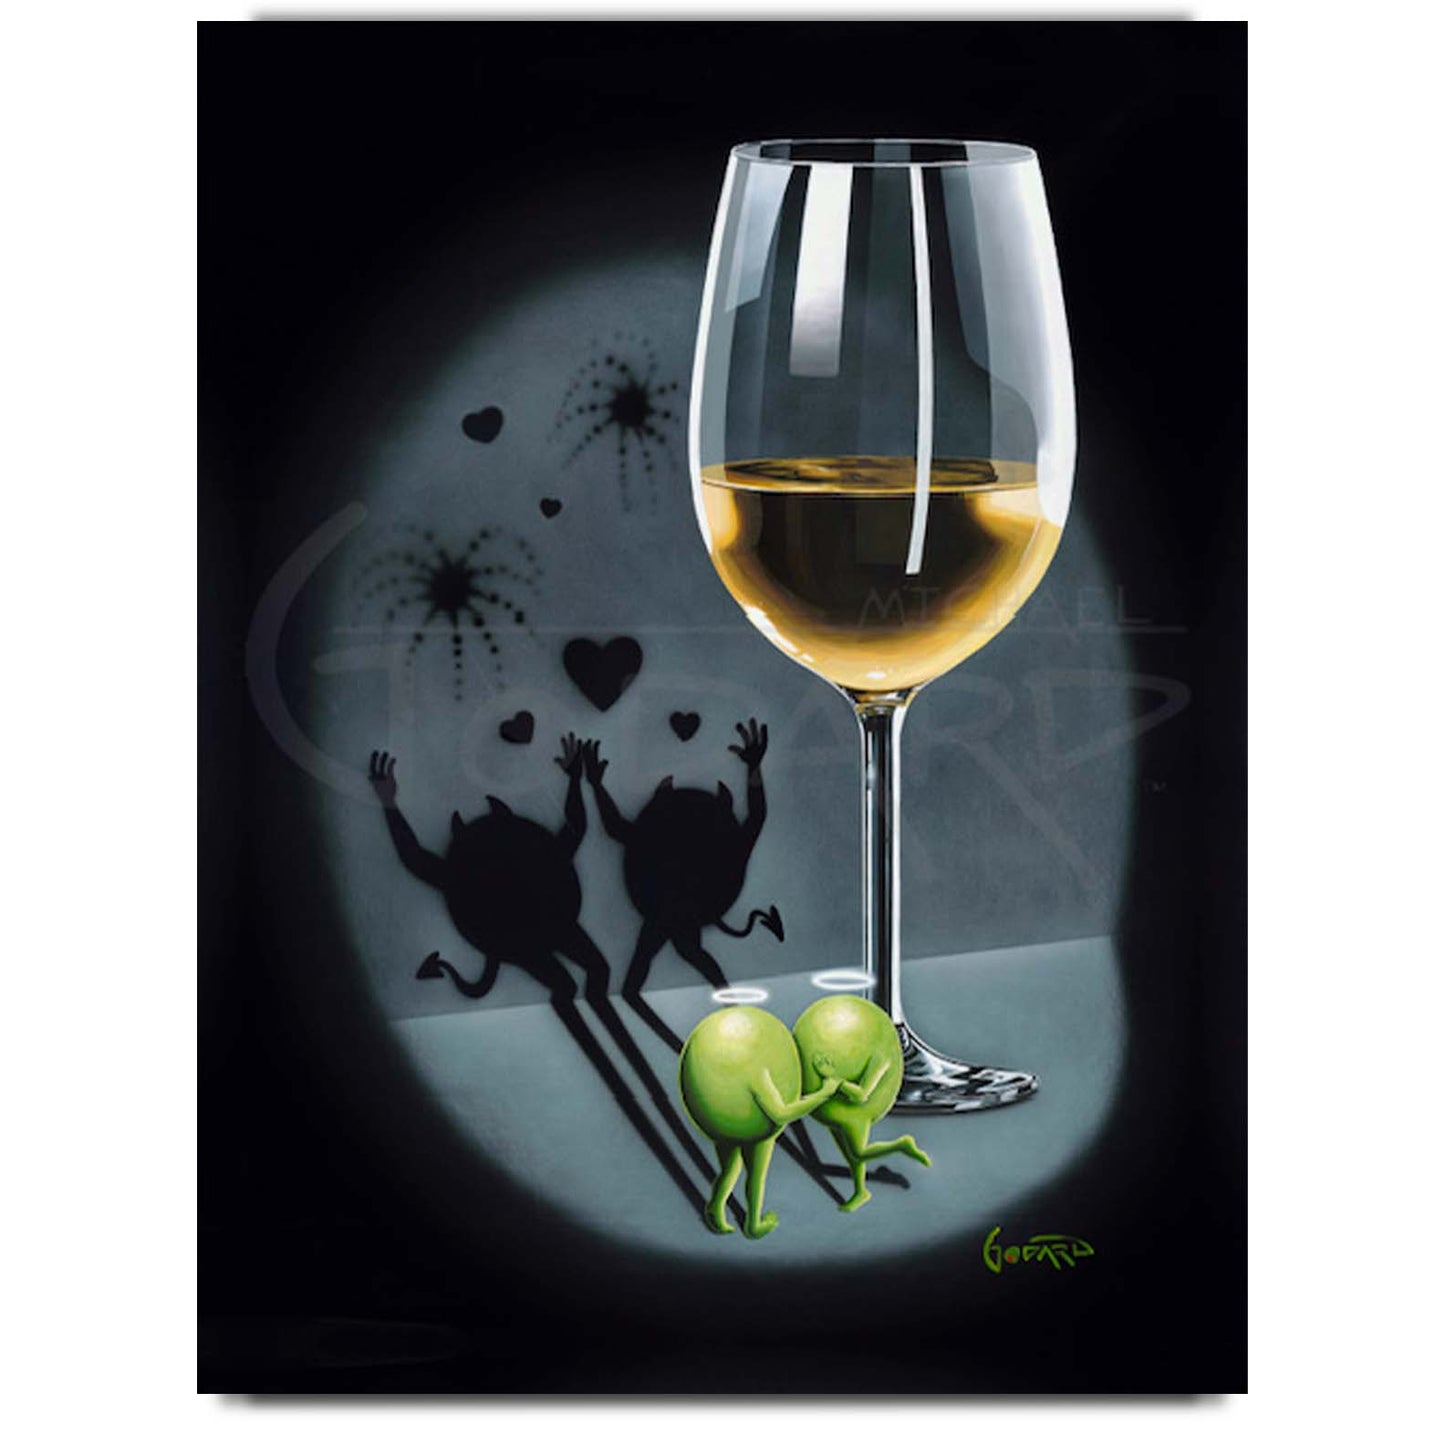 Michael Godard "First Date White Wine" Limited Edition Canvas Giclee